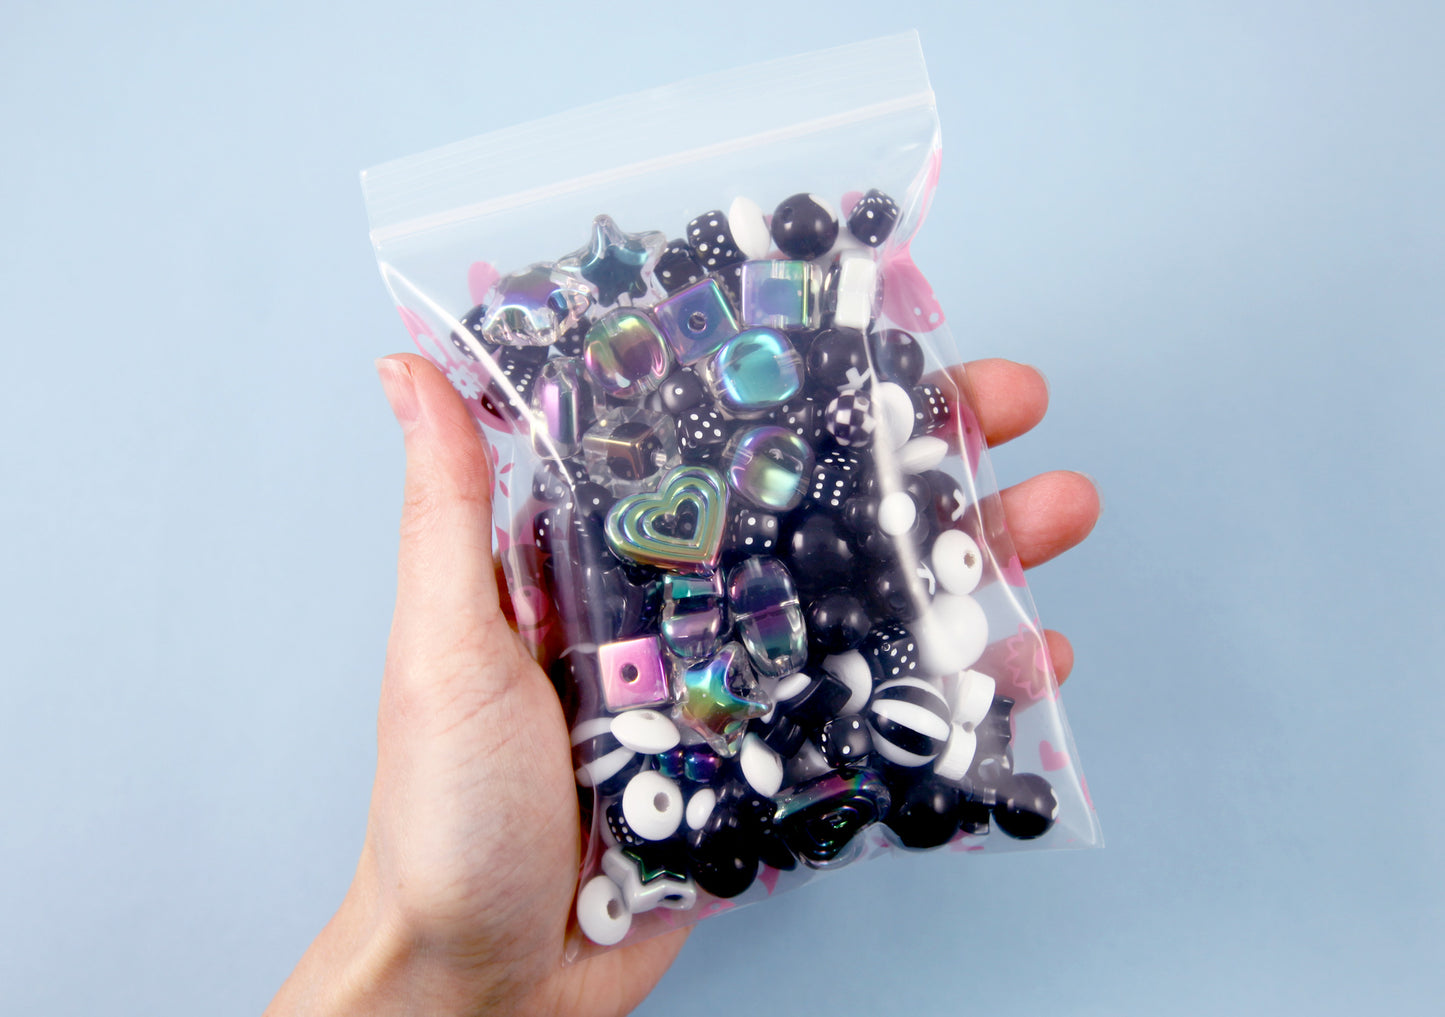 Acrylic Bead Grab Bag - Black and White - Mixed Lot of Plastic Beads - great for kandi, ispy, sensory crafts, jewelry making - Over 200 pcs